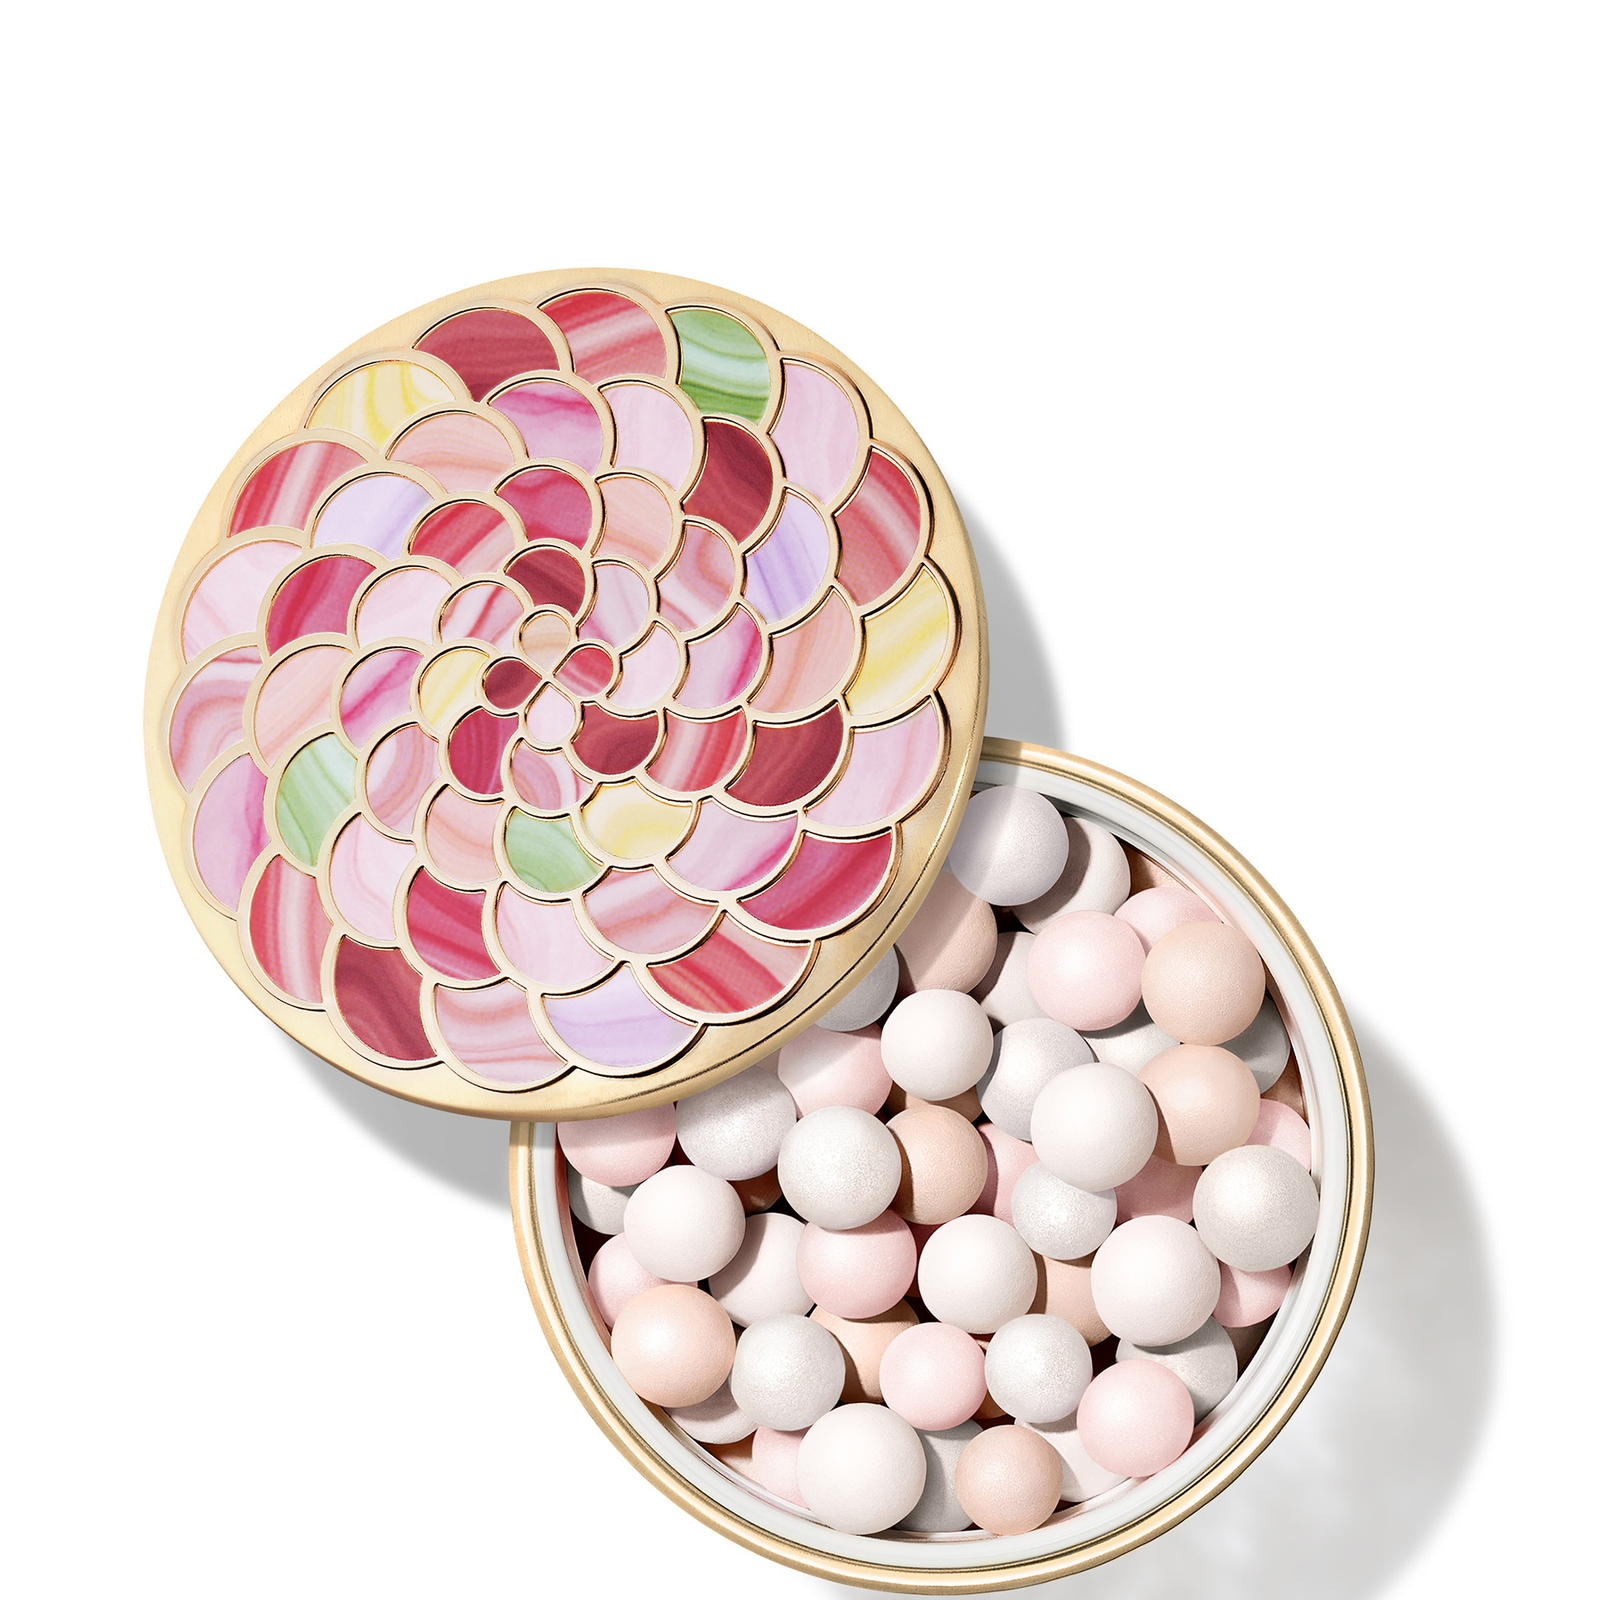 GUERLAIN Meteorites Light-Revealing Pearls of Powder 25g (Various Shades) - 01 Pearly White